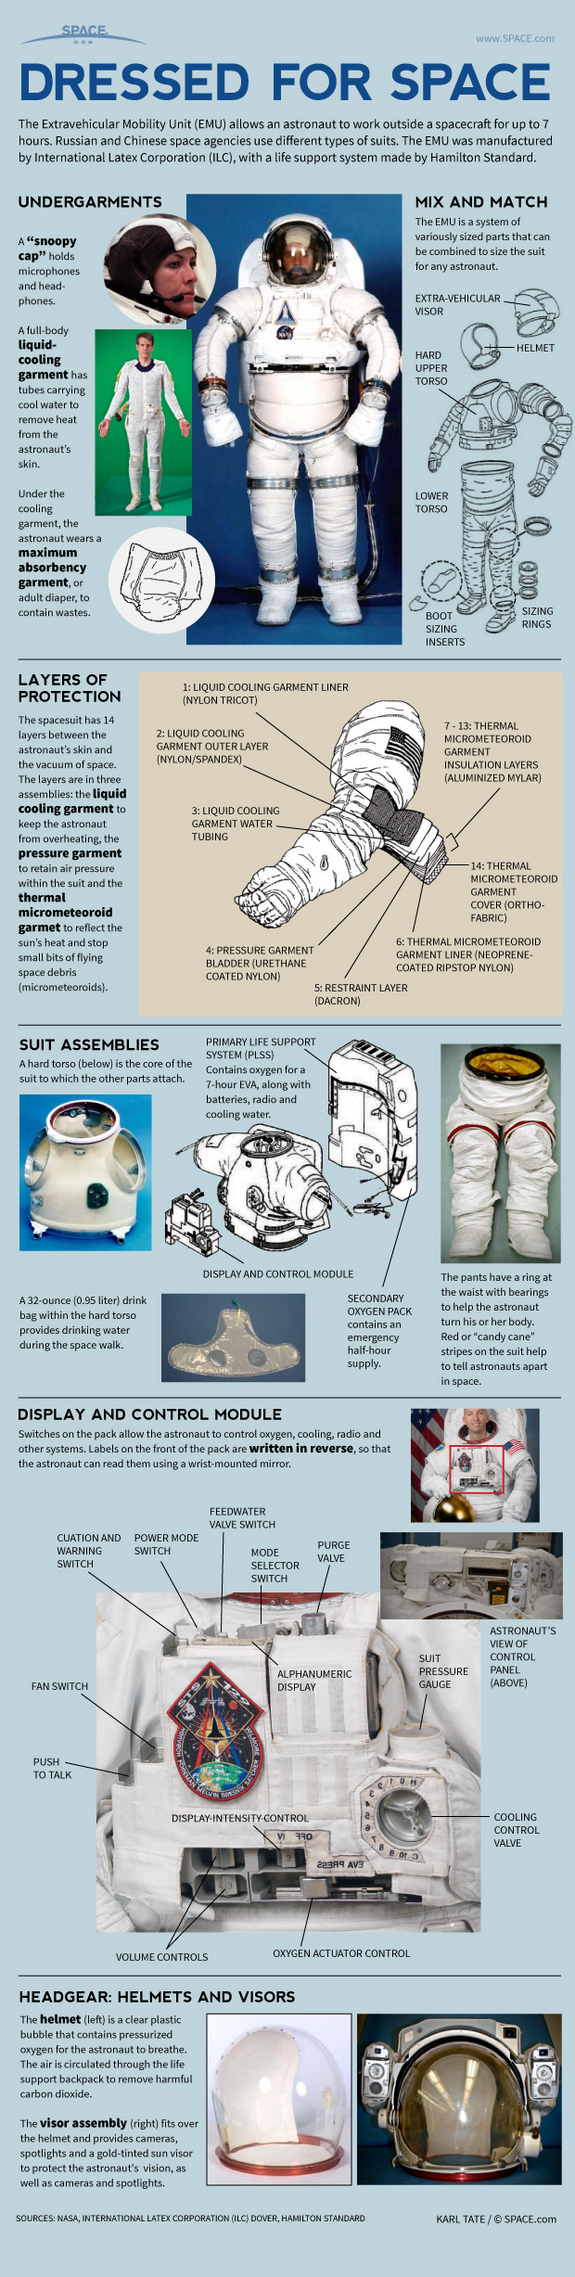 Find out how space suits keep astronauts alive in this SPACE.com infographic.